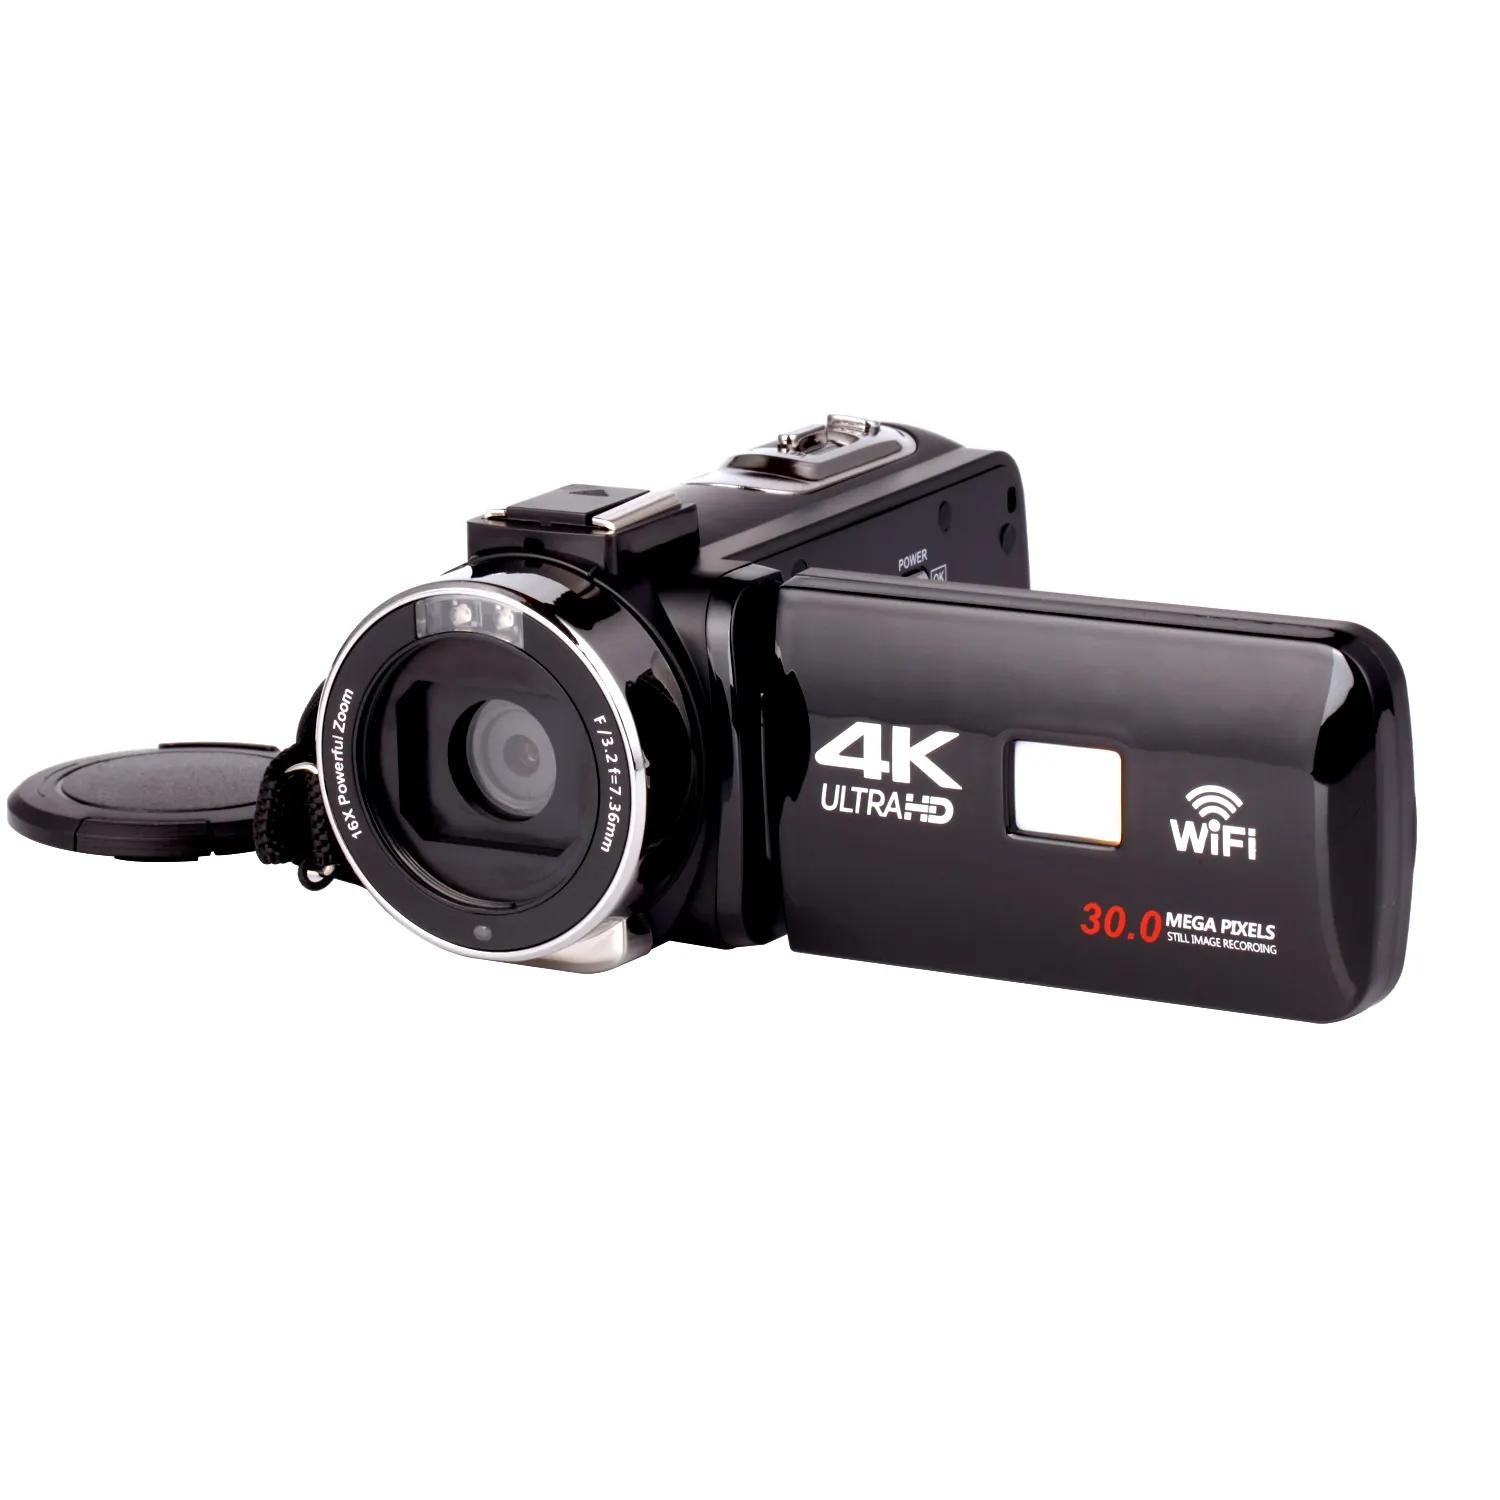 Factory directly selling cheap 4K Wifi Digital professional Video Camera